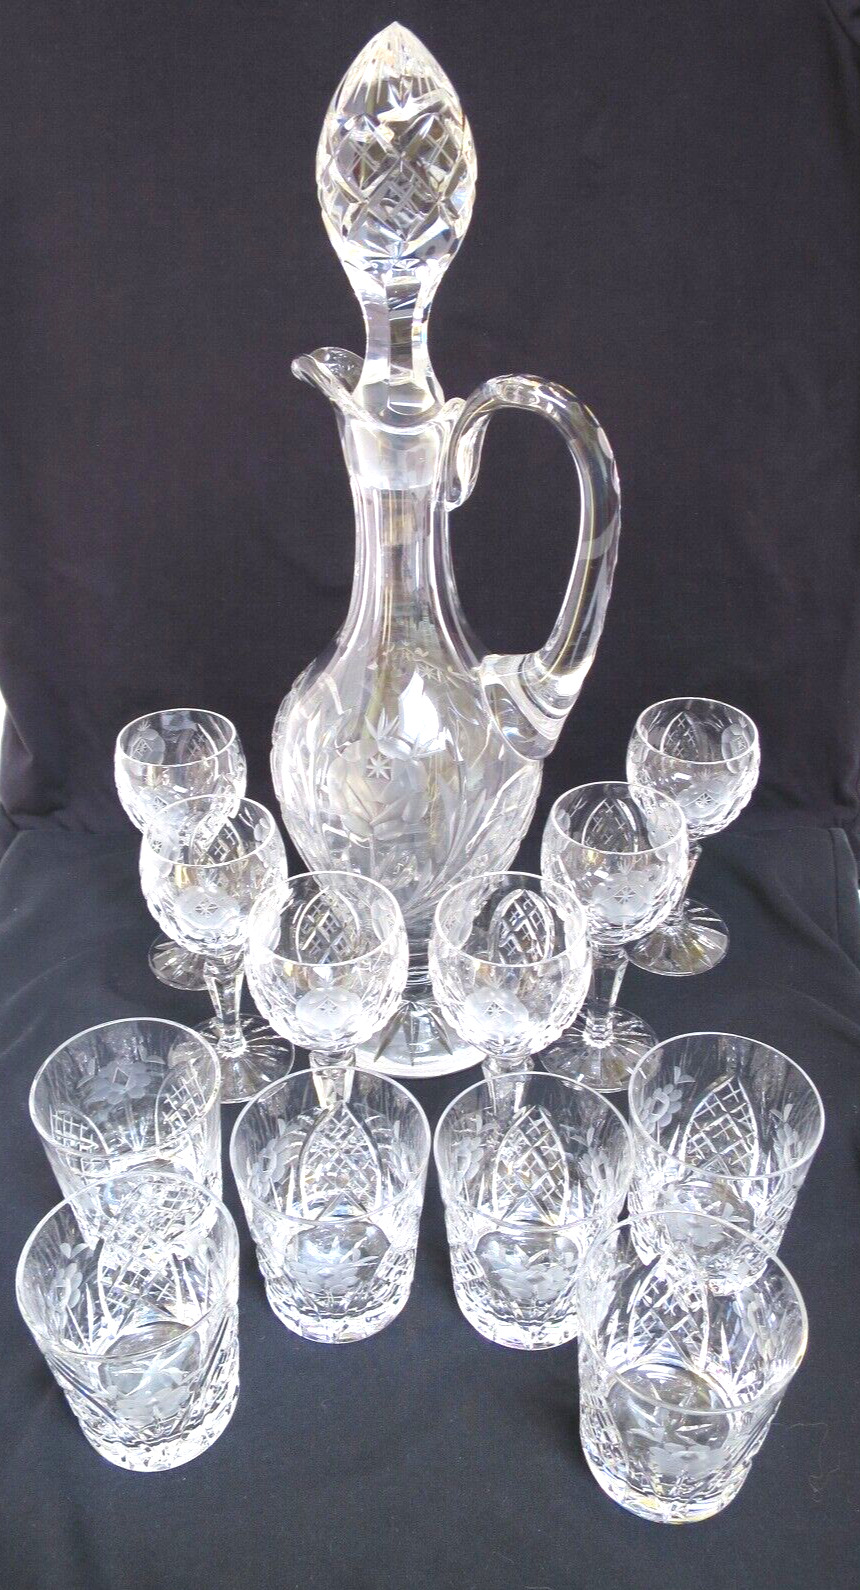 Vintage Cut-glass Decanter w/6 Matching Stemmed Goblets & 6 Low Ball Glasses